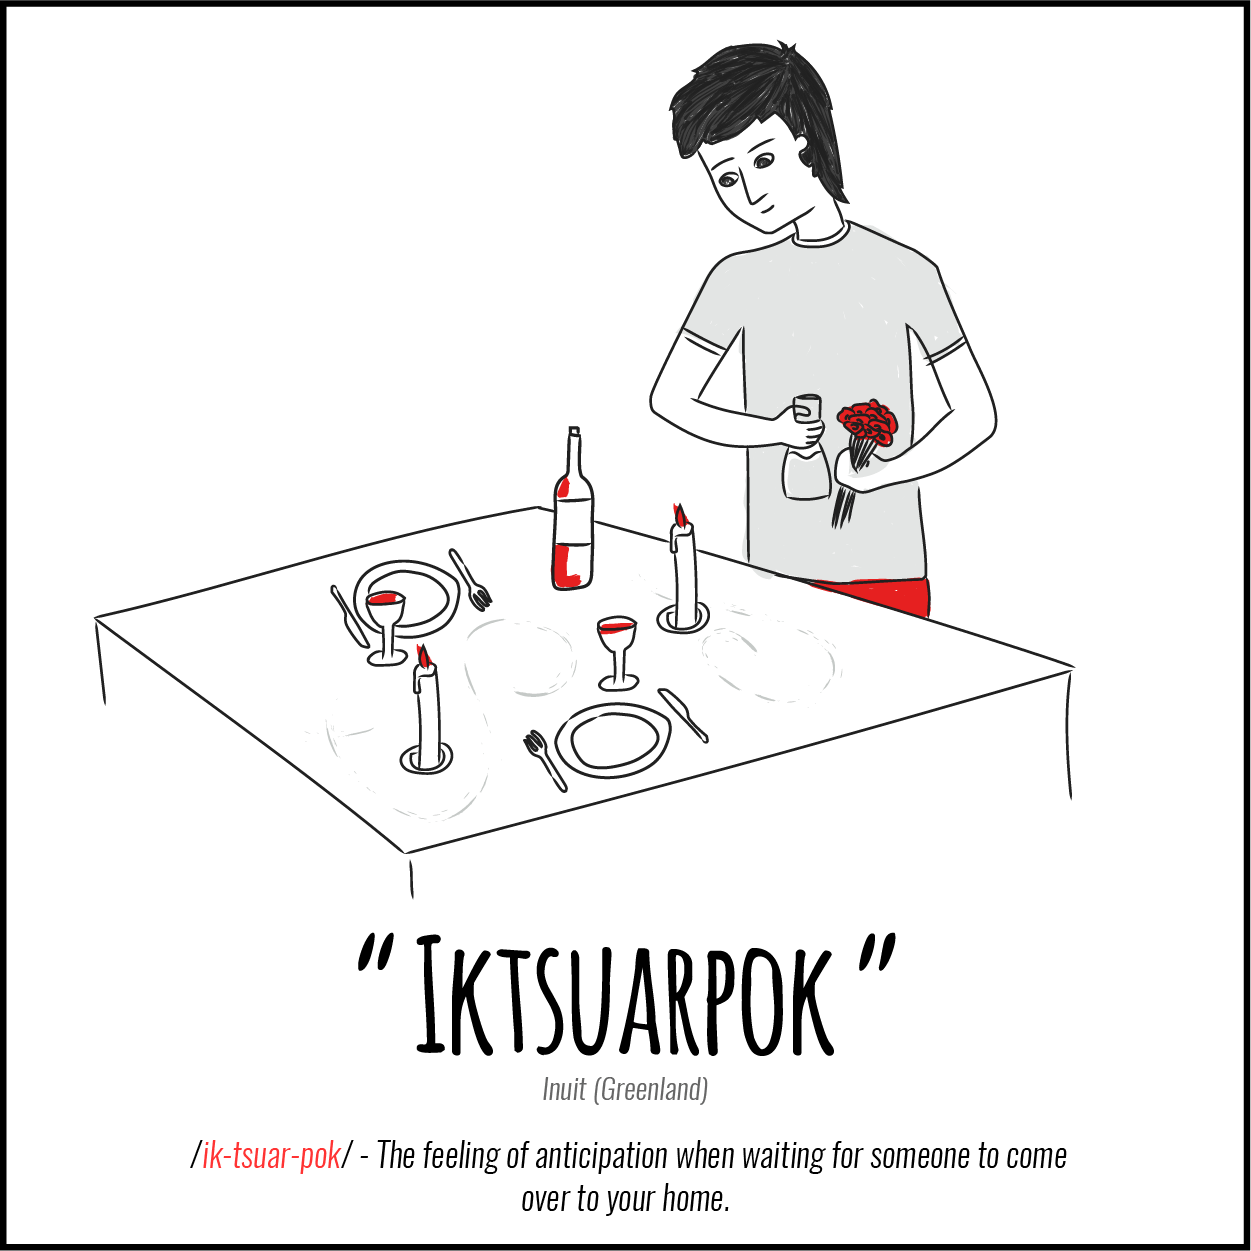 Illustration: Untranslatable Words about love, Iktsuarpok (Inuit, Greenland) The feeling of anticipation when waiting for someone to come over to your home